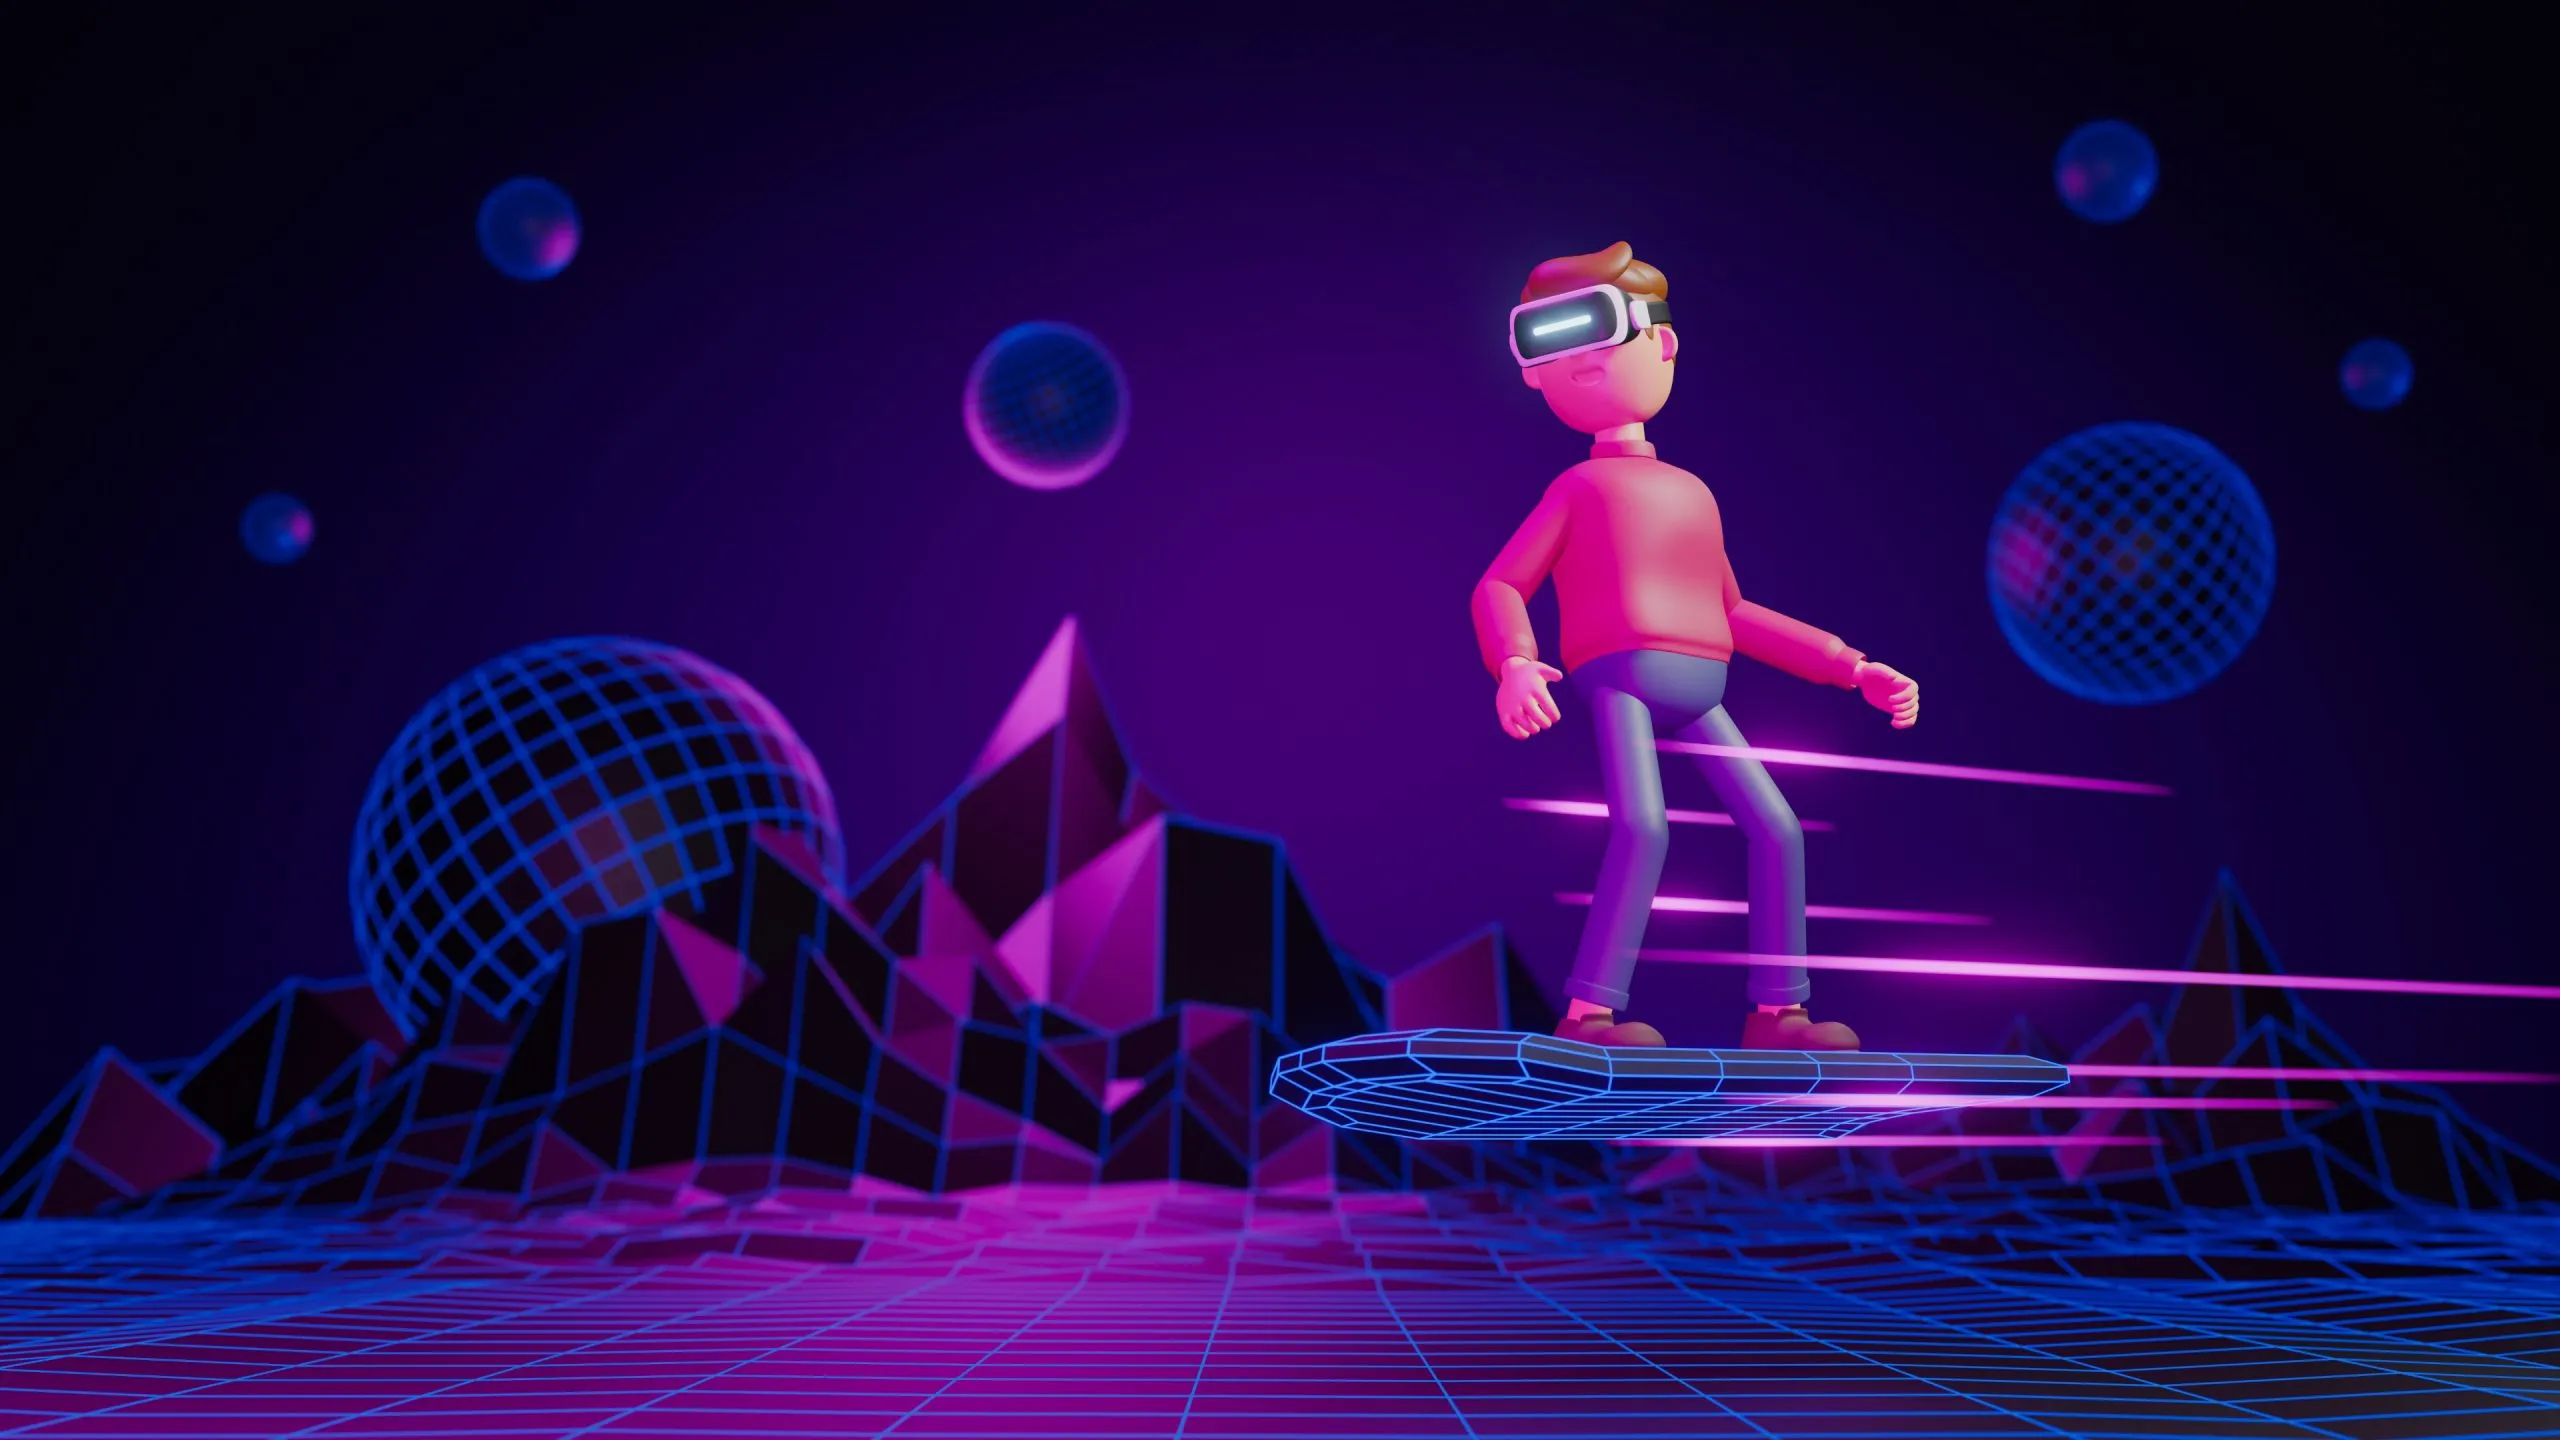 Gamification of the Metaverse: A New Era for Ownership & Interaction